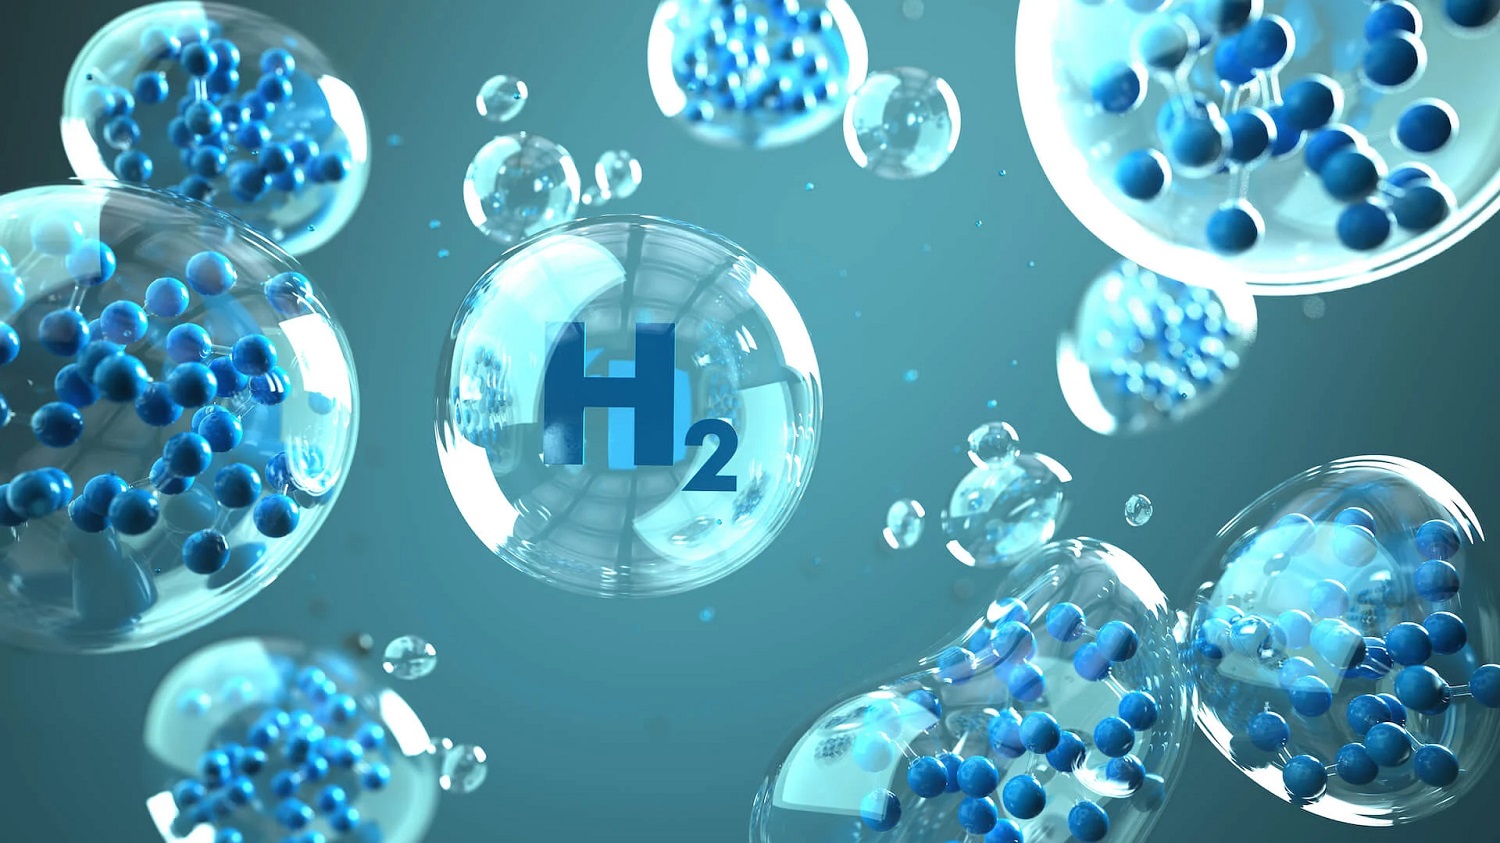 Hydrogen Market Is Estimated To Witness High Growth Owing To Increasing Demand for Clean Energy